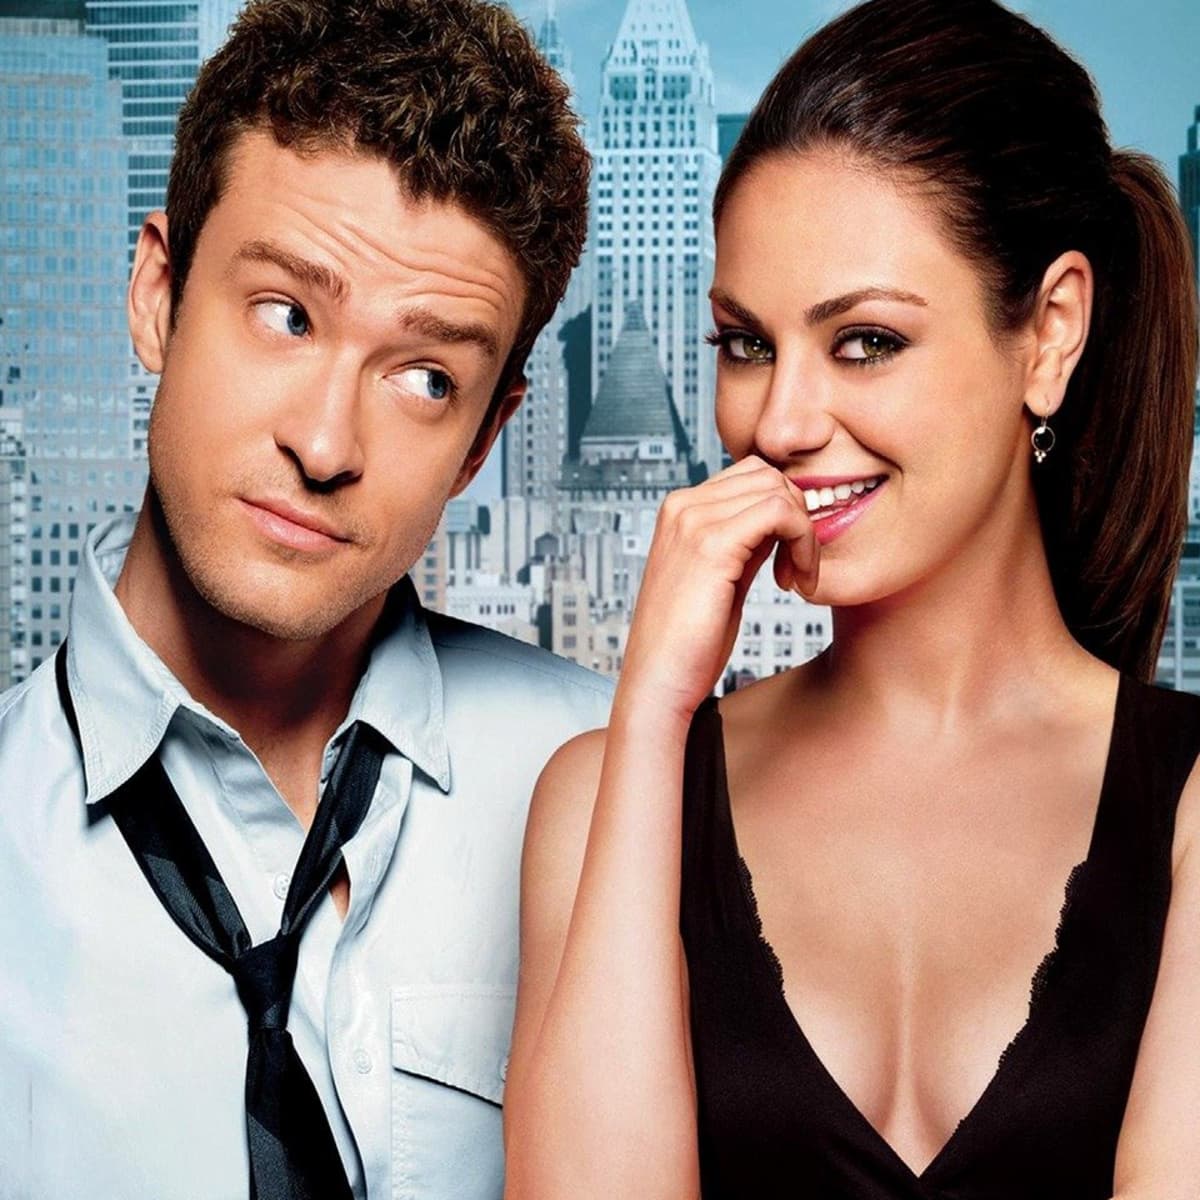 5 Movies Like Friends With Benefits That You'll Love